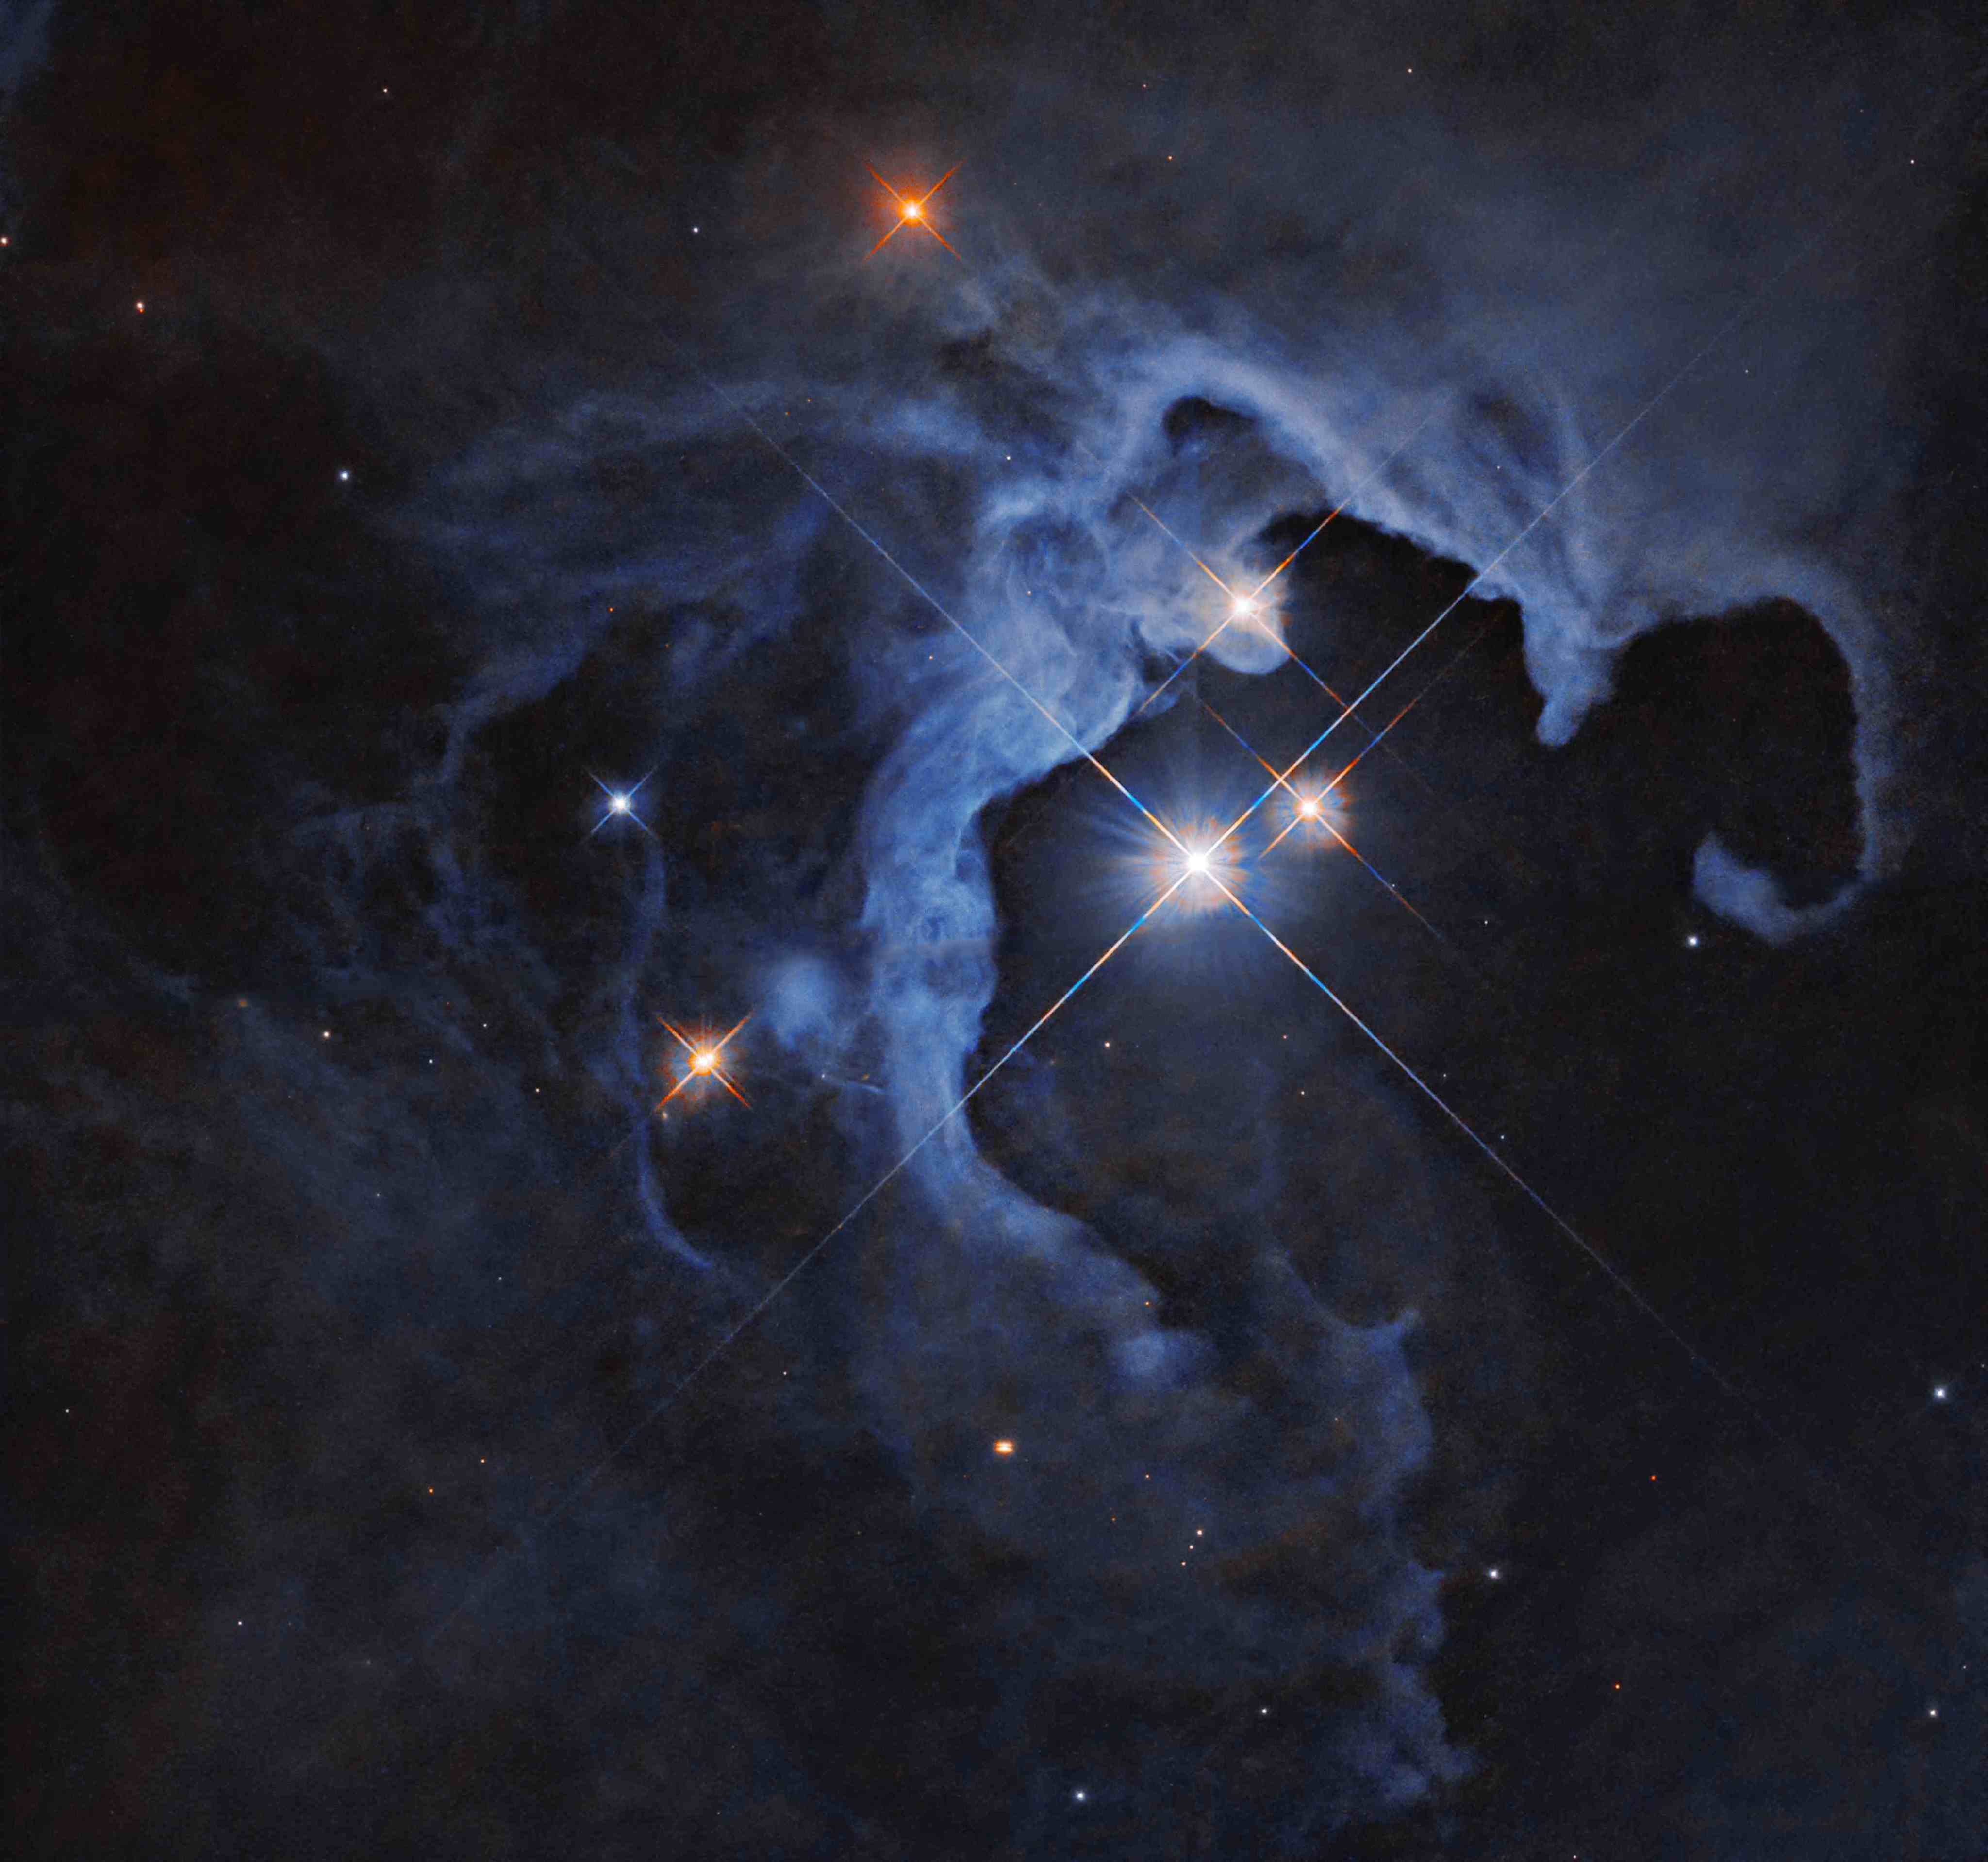 Three bright stars with diffraction spikes shine near the center-right of the image, illuminating nearby clouds that glow in pale blue. The clouds darken at the edges of the image, and are dotted with smaller stars, some also with diffraction spikes.